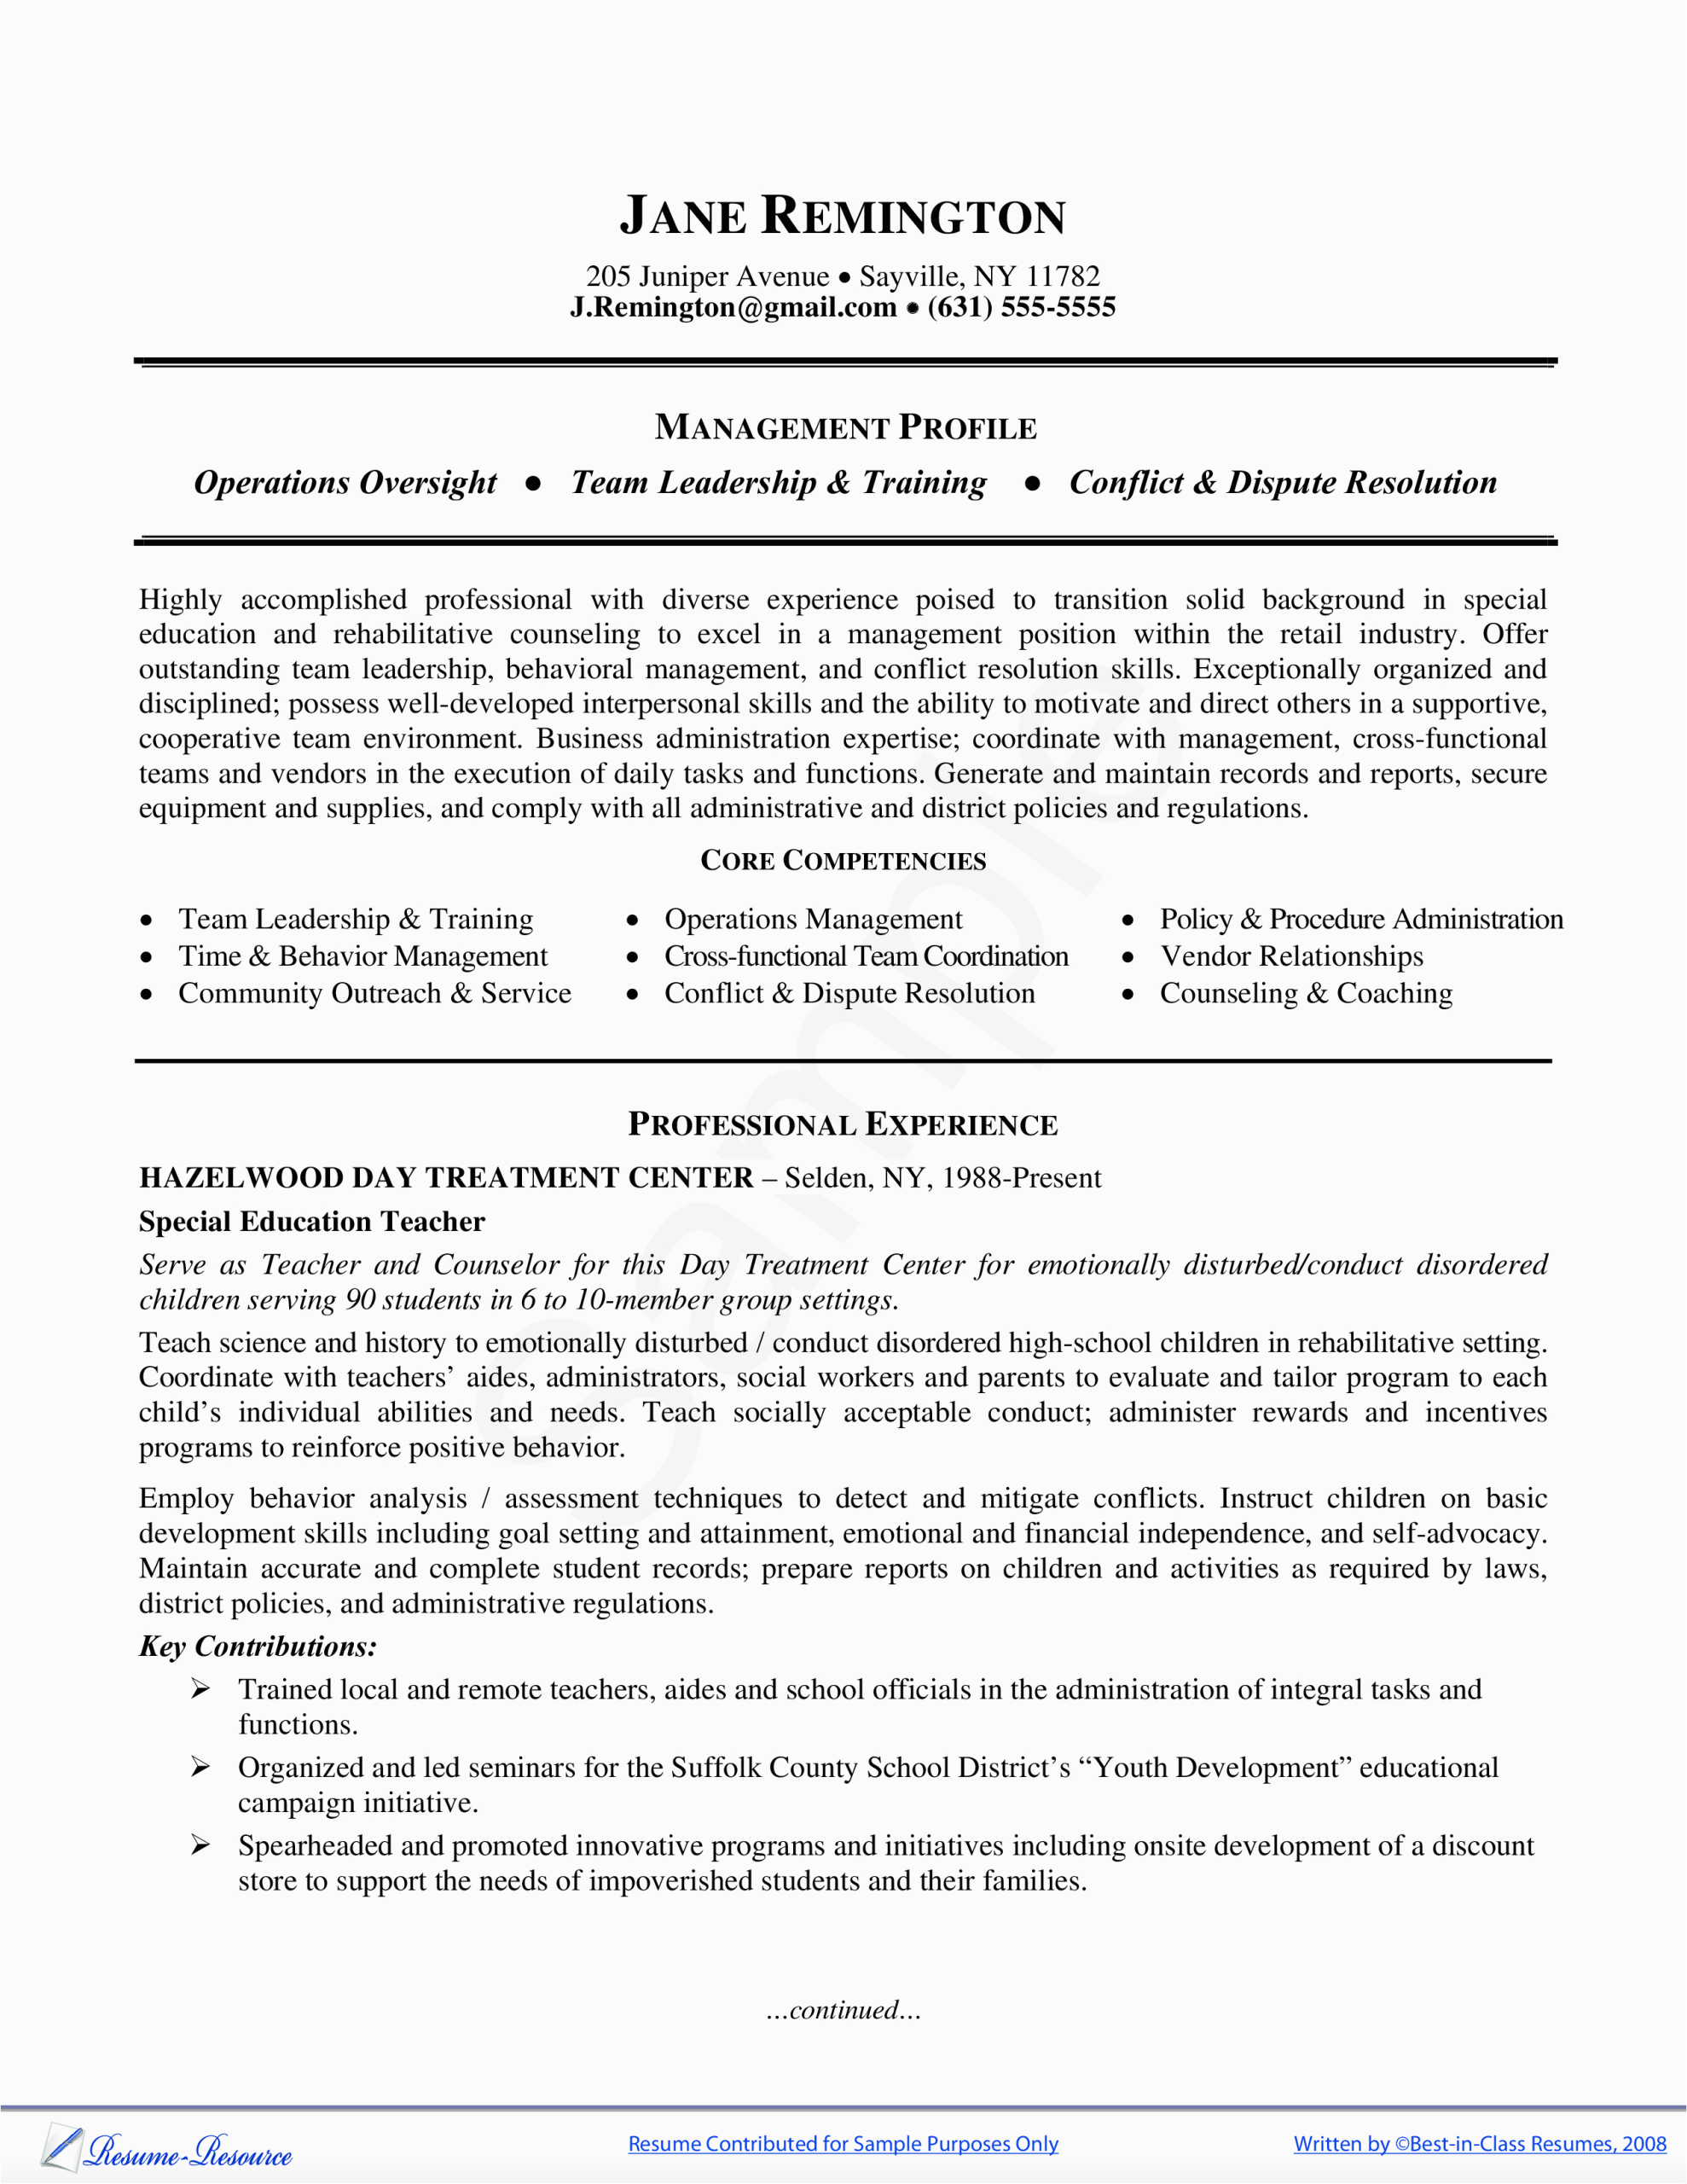 Samples Of Functional Resumes for Career Change Career Change Functional Resume Examples Best Resume Ideas